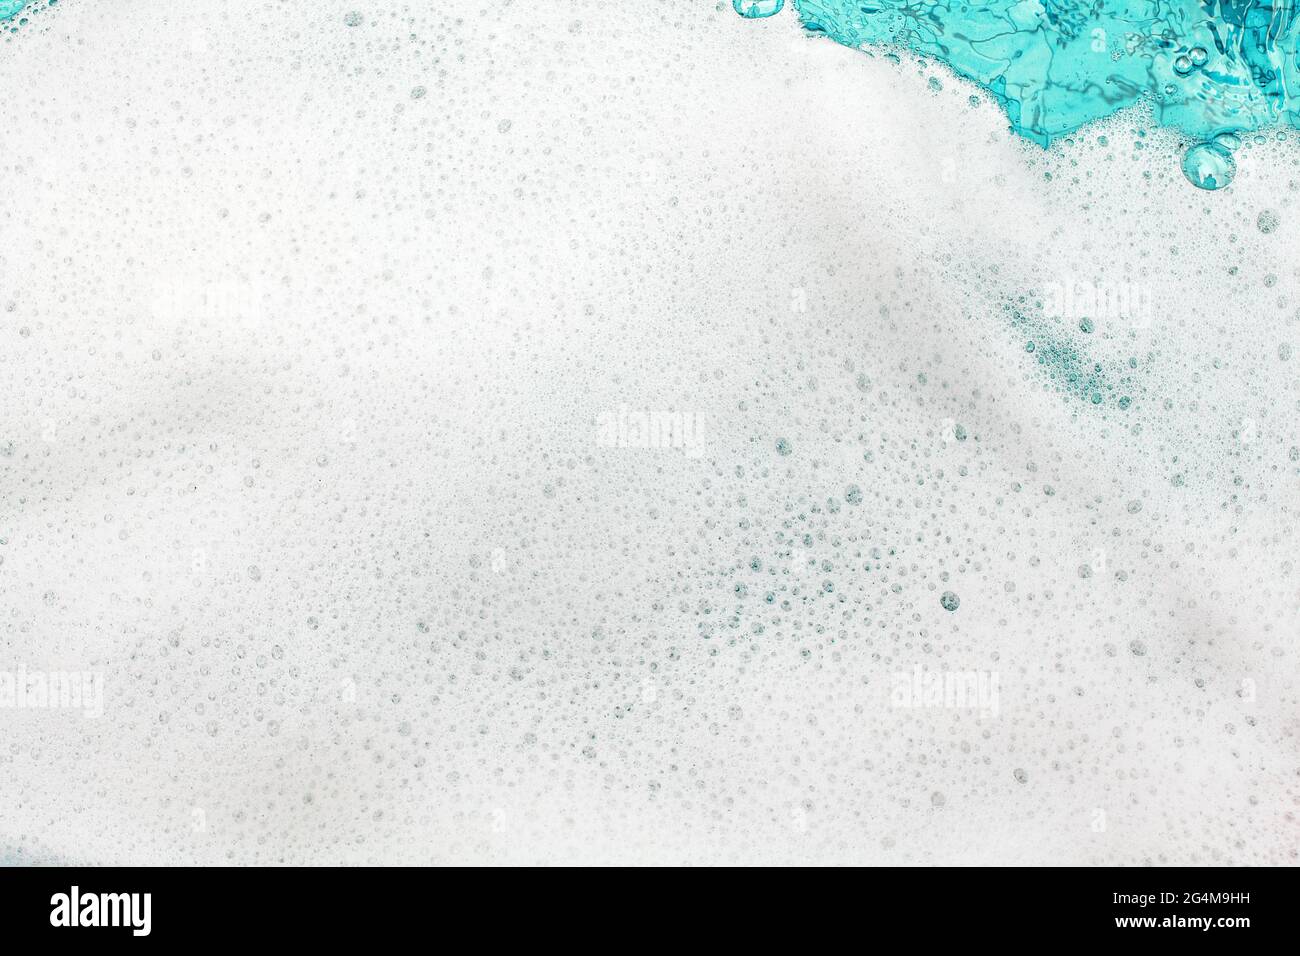 White foam blue water background closeup, sea or ocean foam wave pattern, froth bubbles texture, soap spume backdrop, cleaning soap sud lather surface Stock Photo